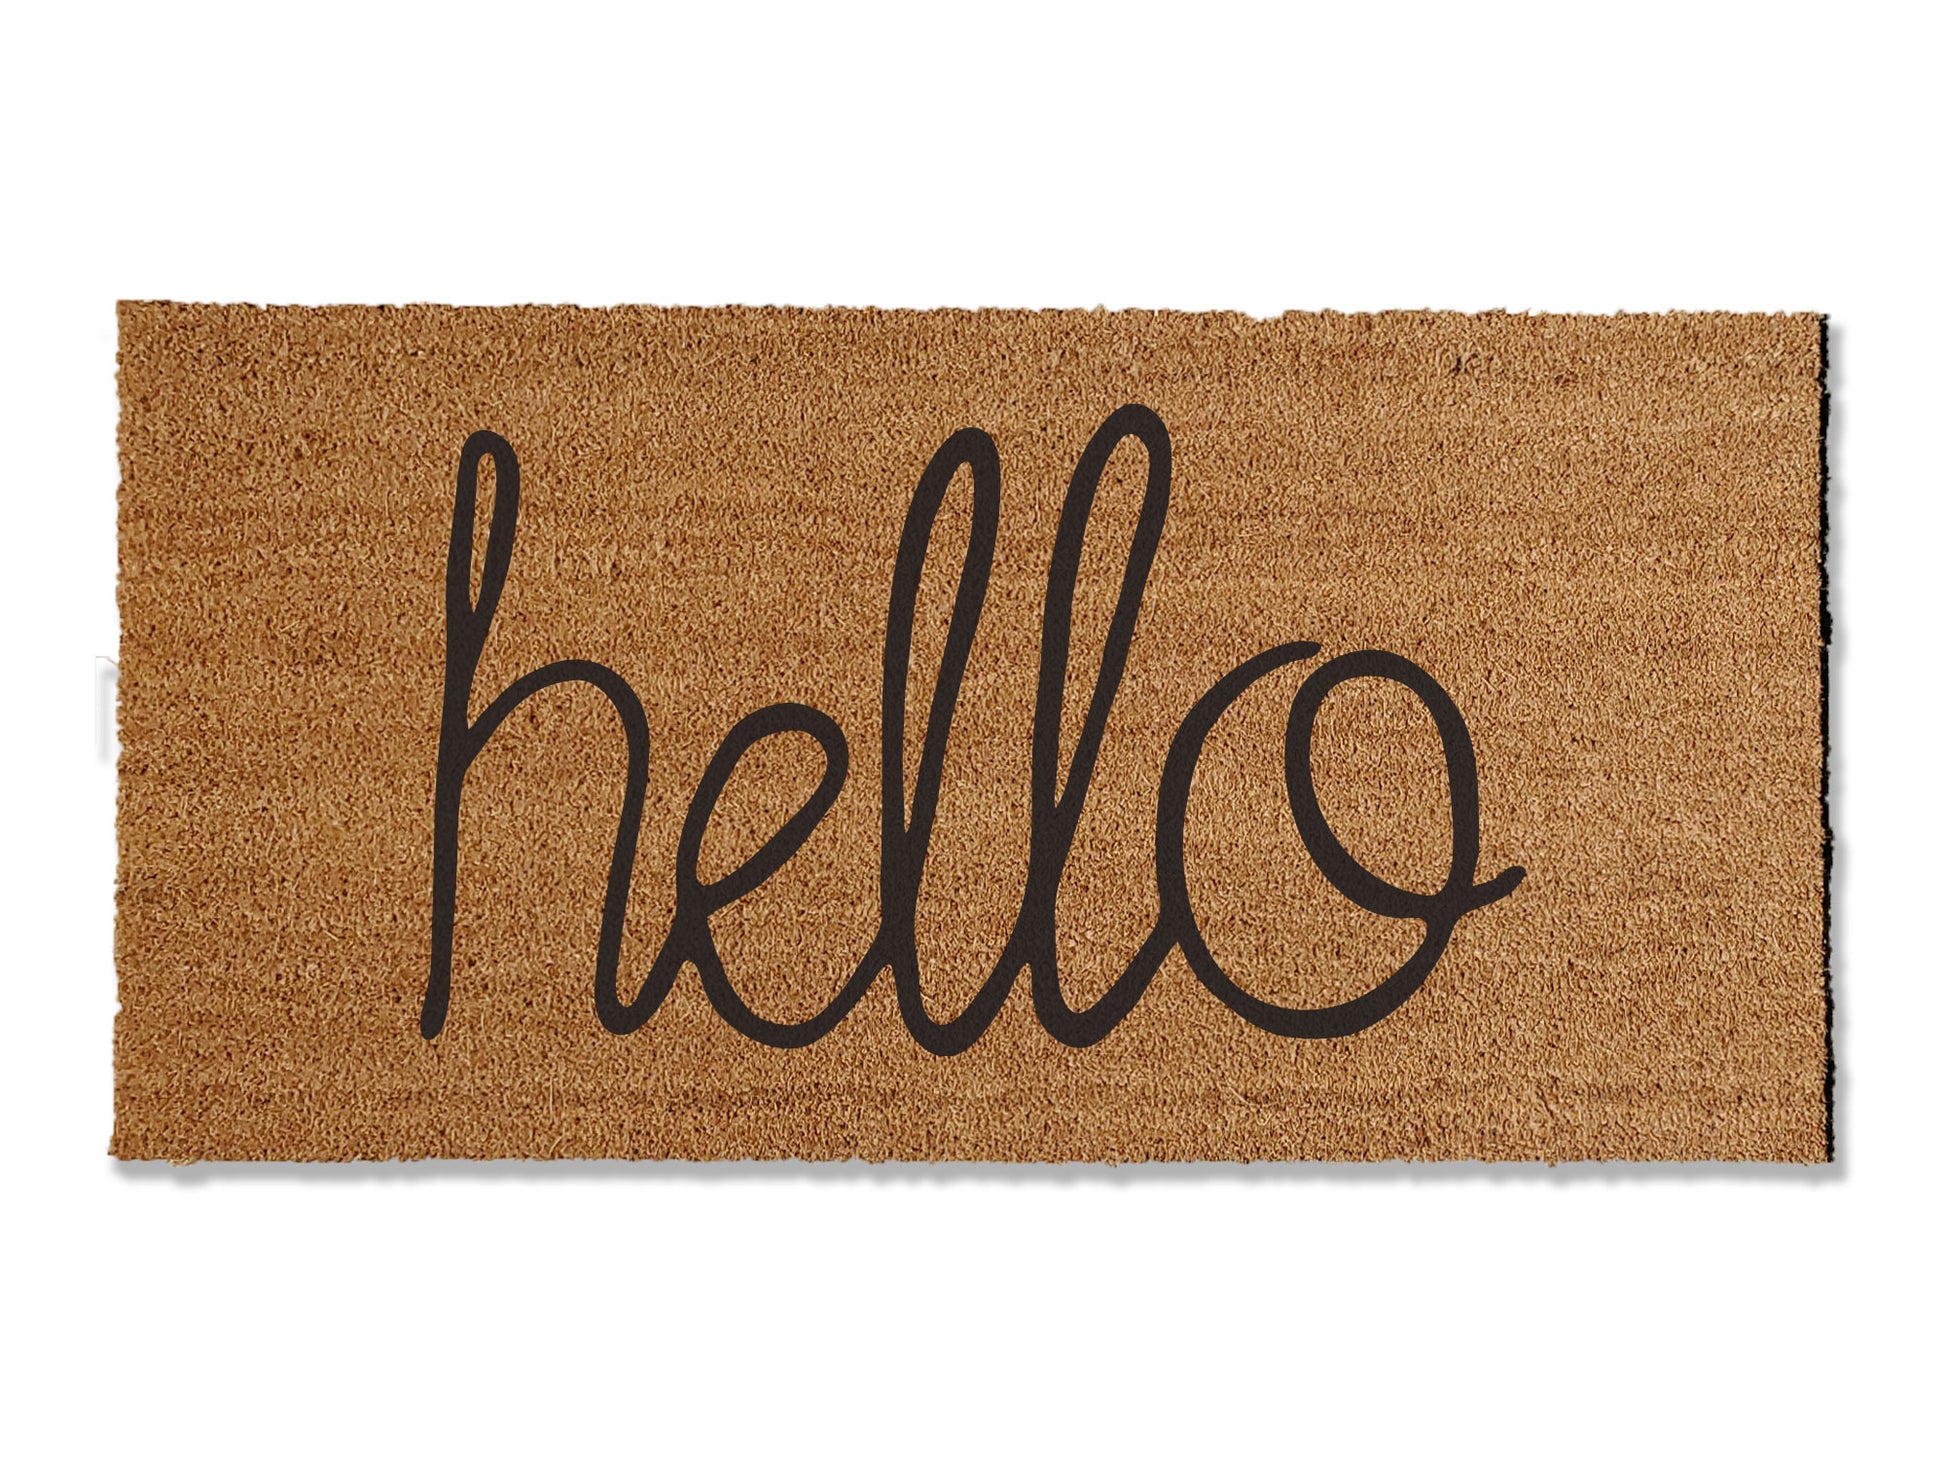 Invite warmth with our coir doormat featuring a hand-written 'Hello' greeting. Offered in multiple sizes, this versatile mat is ideal for year-round use, adding an elegant touch to your entryway. Beyond elevating your home's entrance, it serves as an effective barrier, preventing dirt from entering your space.